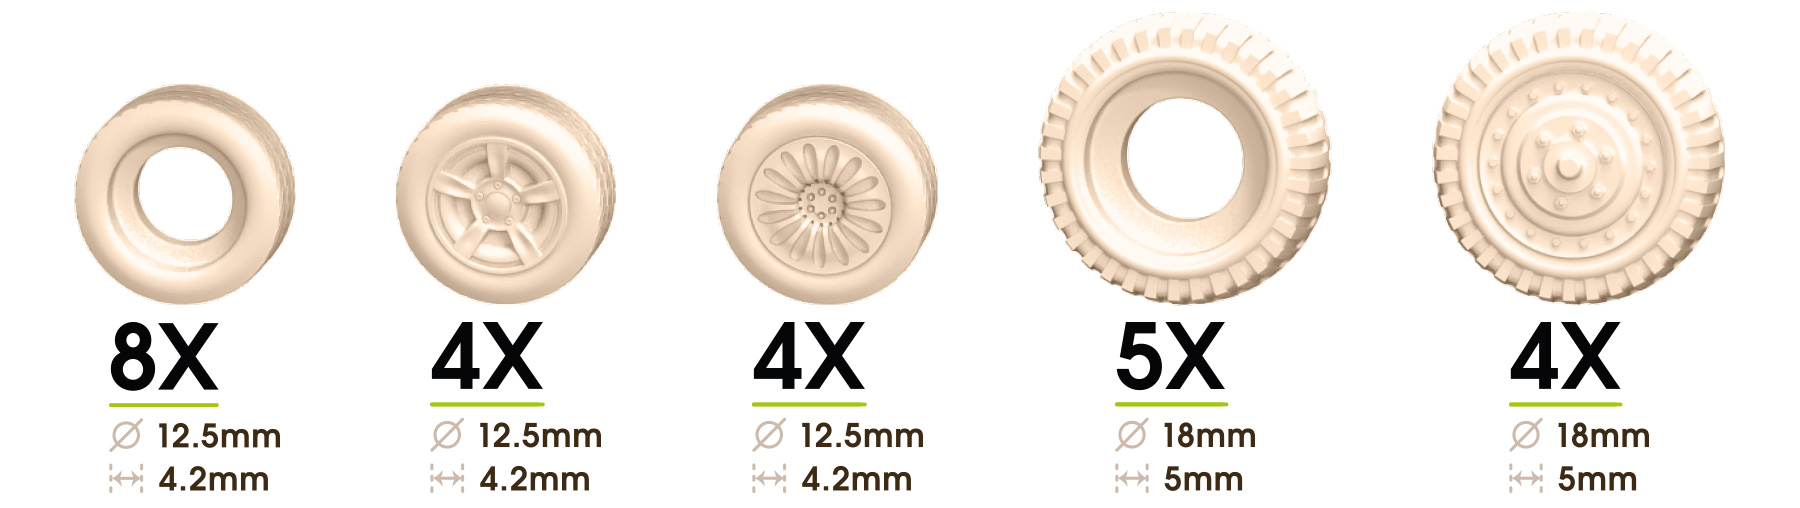 Tyre and Hubcap Sizes.png